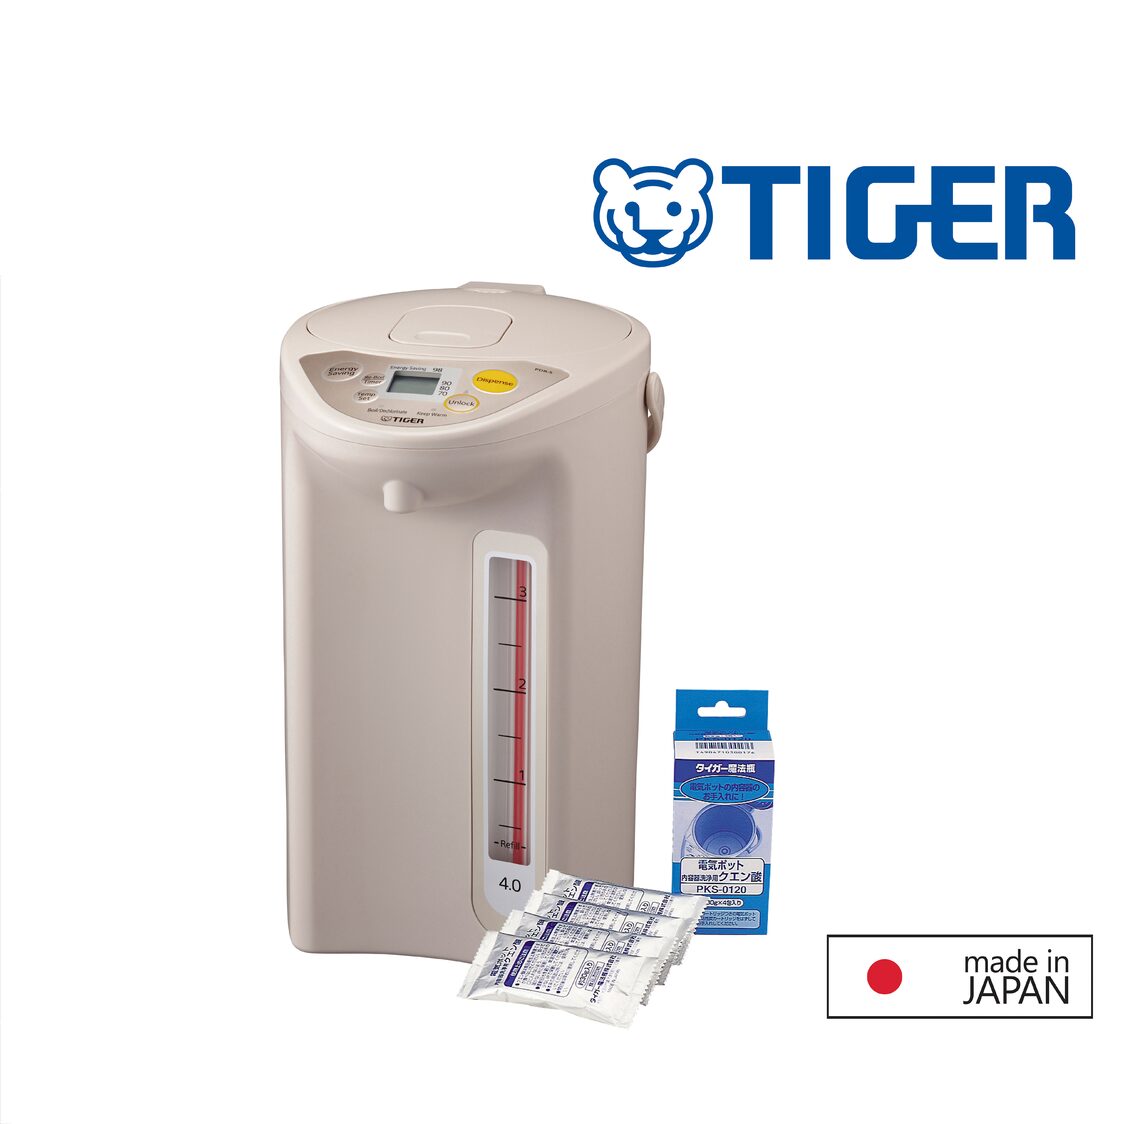 TIGER 40L Electric Water Heater  TIGER Citric Acid Airpot Cleaner Made In Japan PDR-S40SPKS-0120